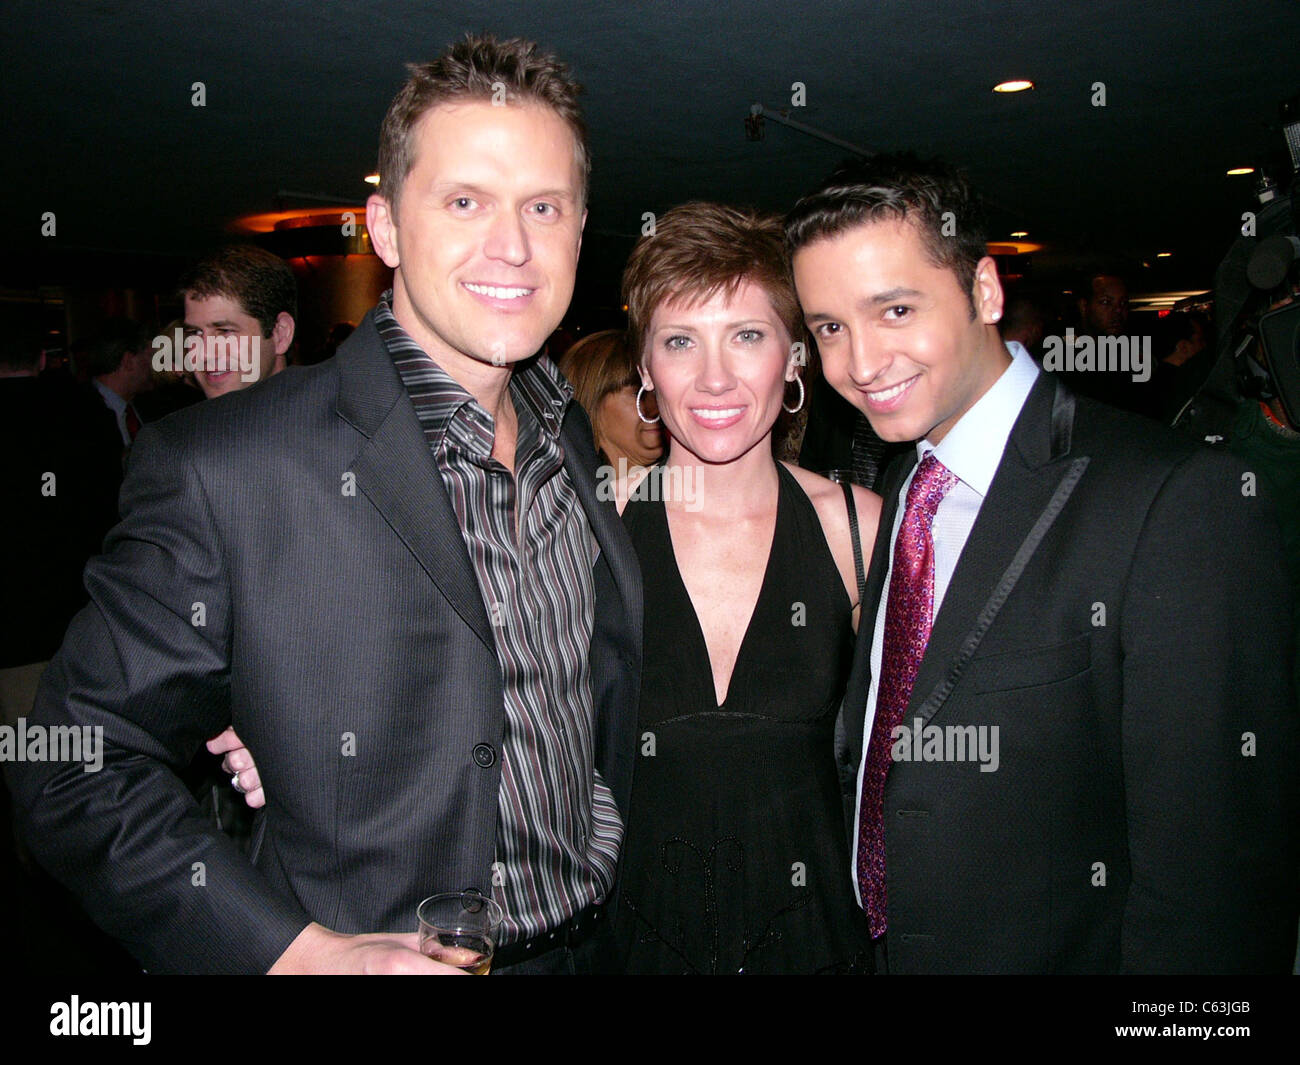 Kelly Perdew, Therisa Kennedy, and Jai Rodriguez at the after party for THE APPRENTICE, NY, December 16, 2004. (photo: Rob Rich/Everett Collection) Stock Photo